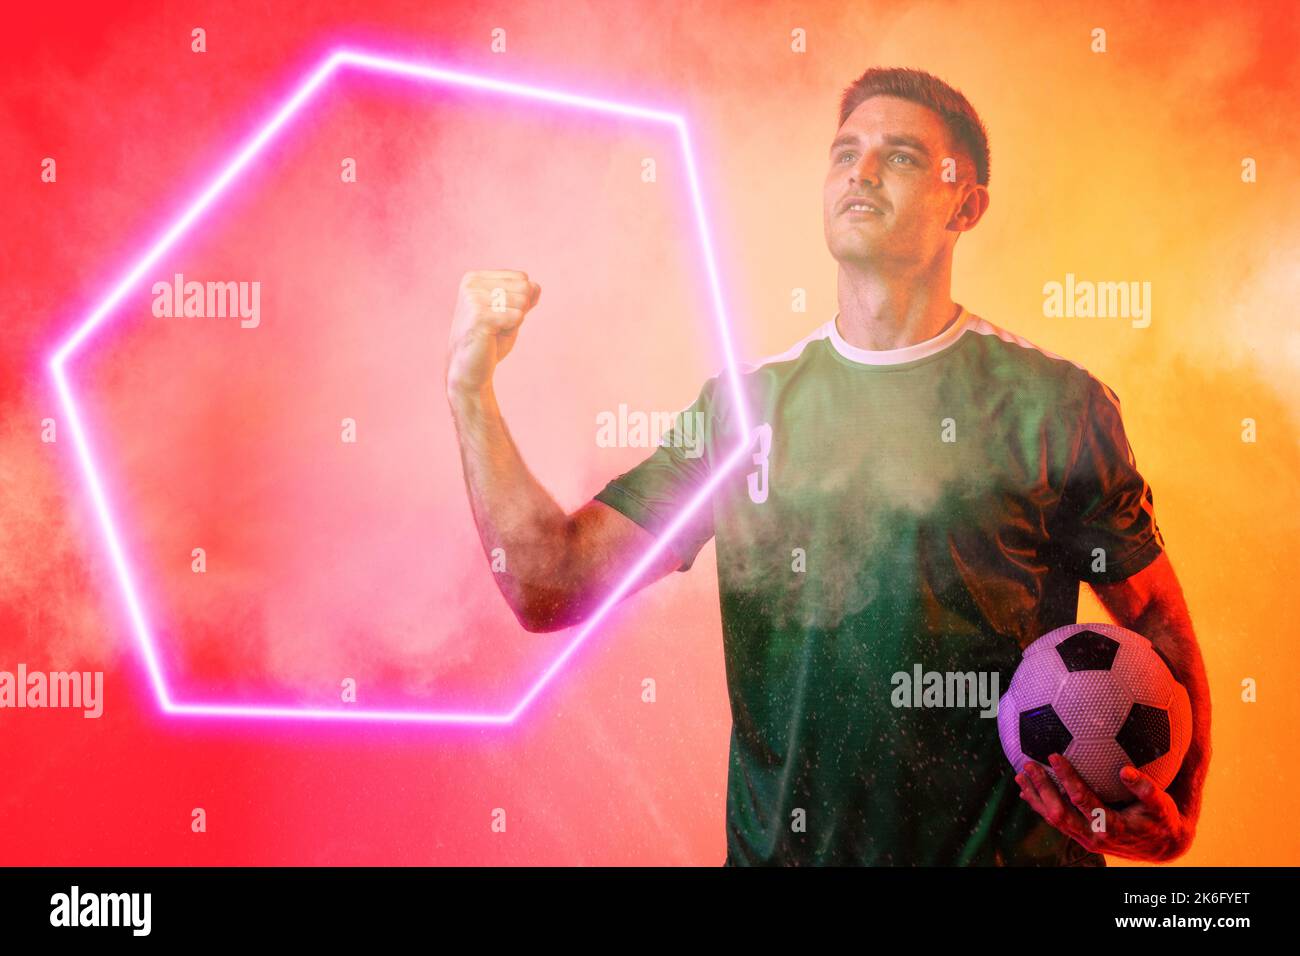 Caucasian male player holding soccer ball clenching fist over illuminated hexagon on neon background Stock Photo